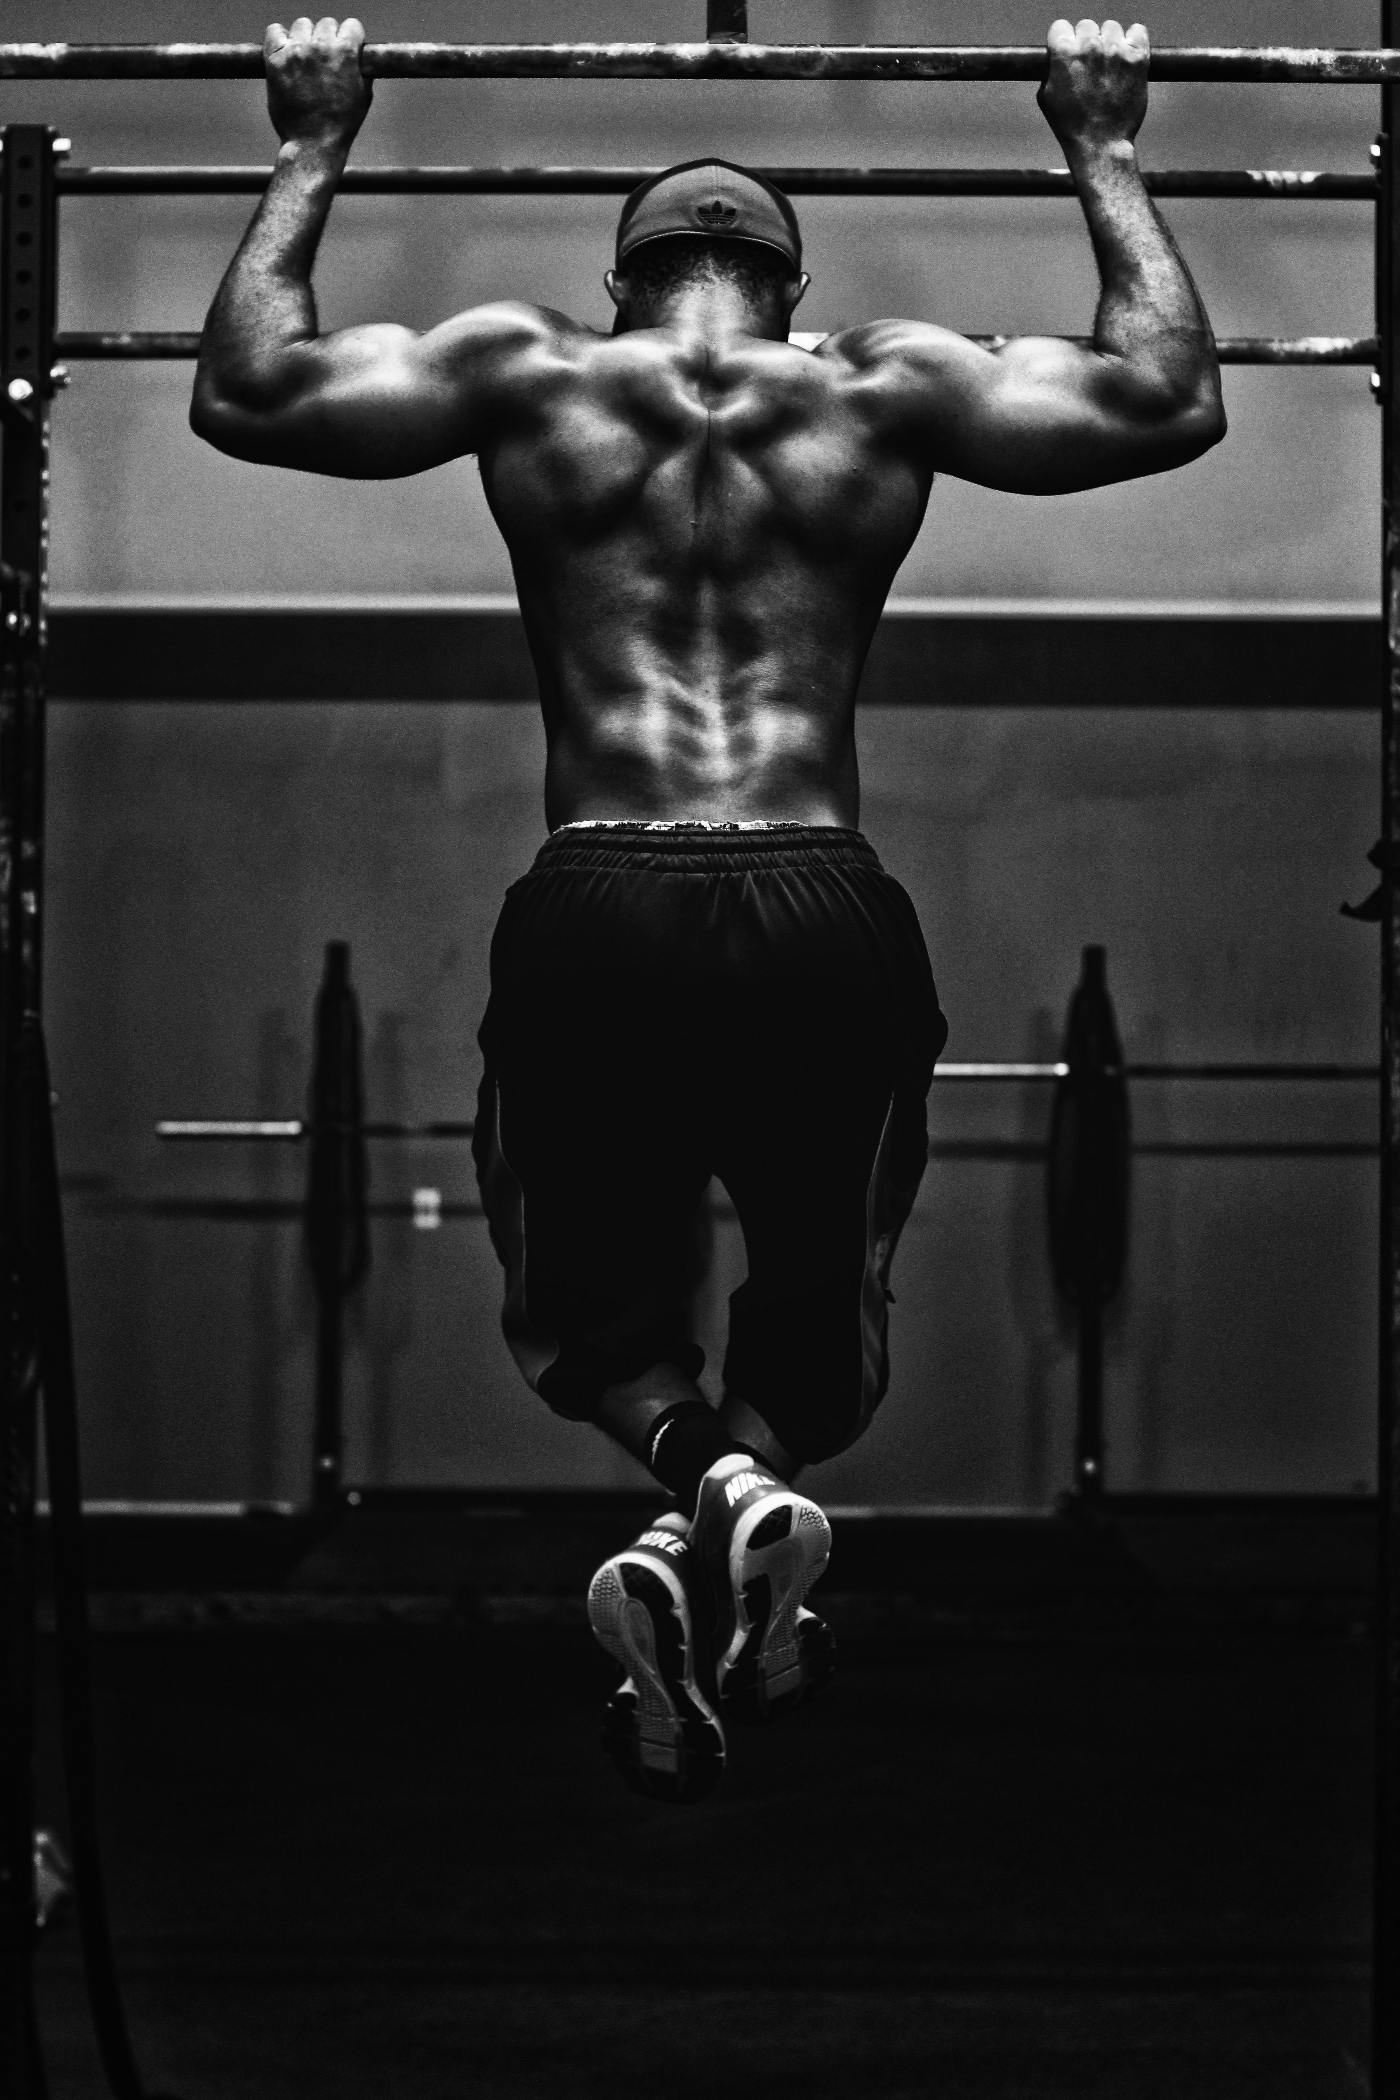 A muscular man on a pull up bar mid motion